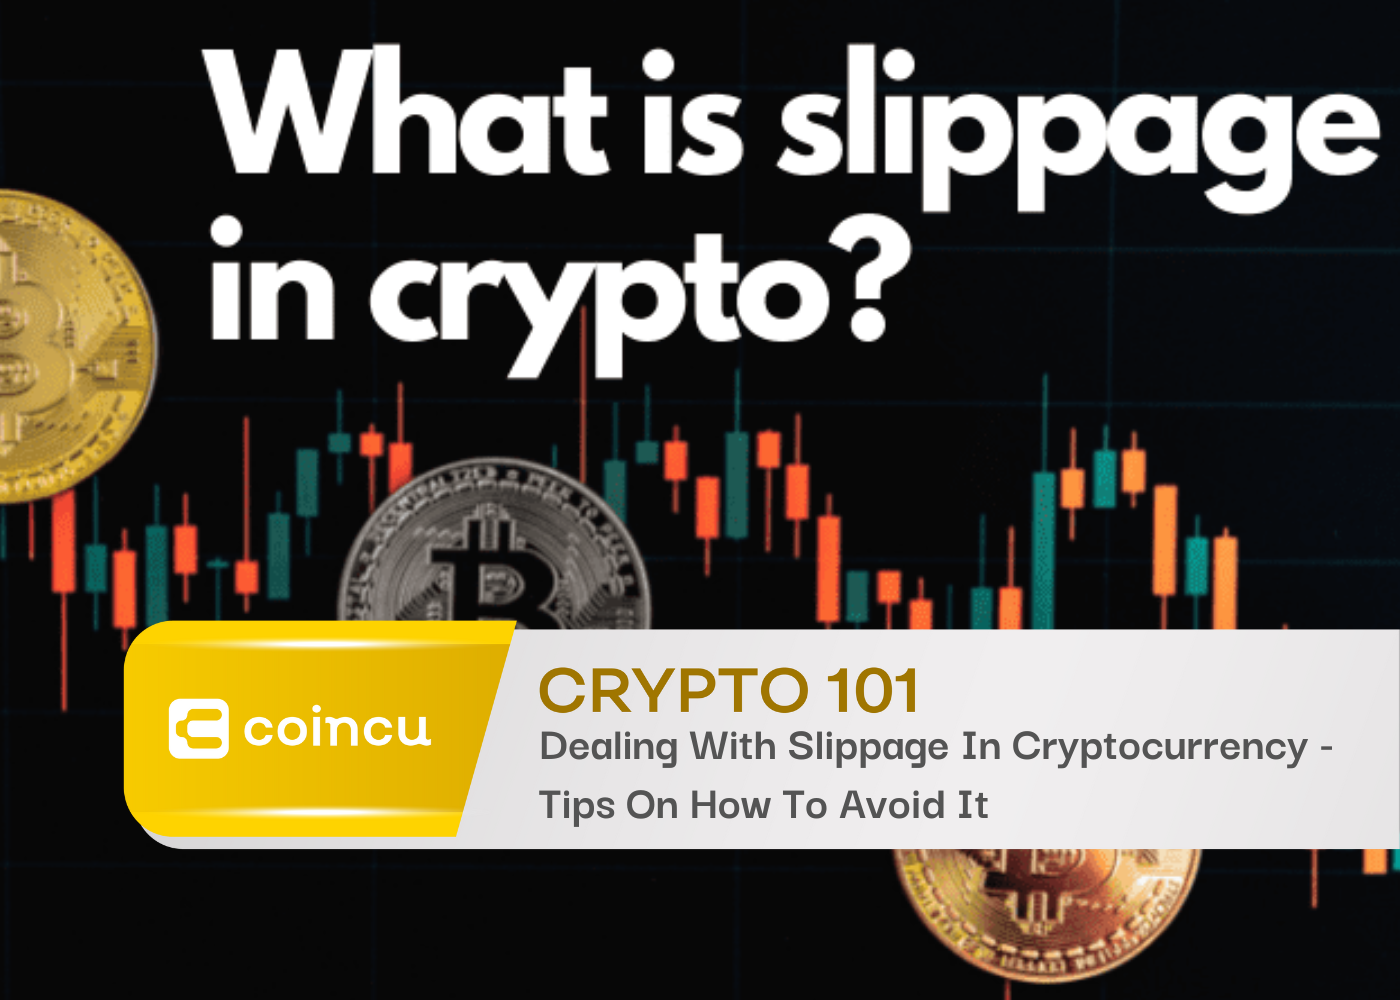 Dealing With Slippage In Cryptocurrency - Tips On How To Avoid It